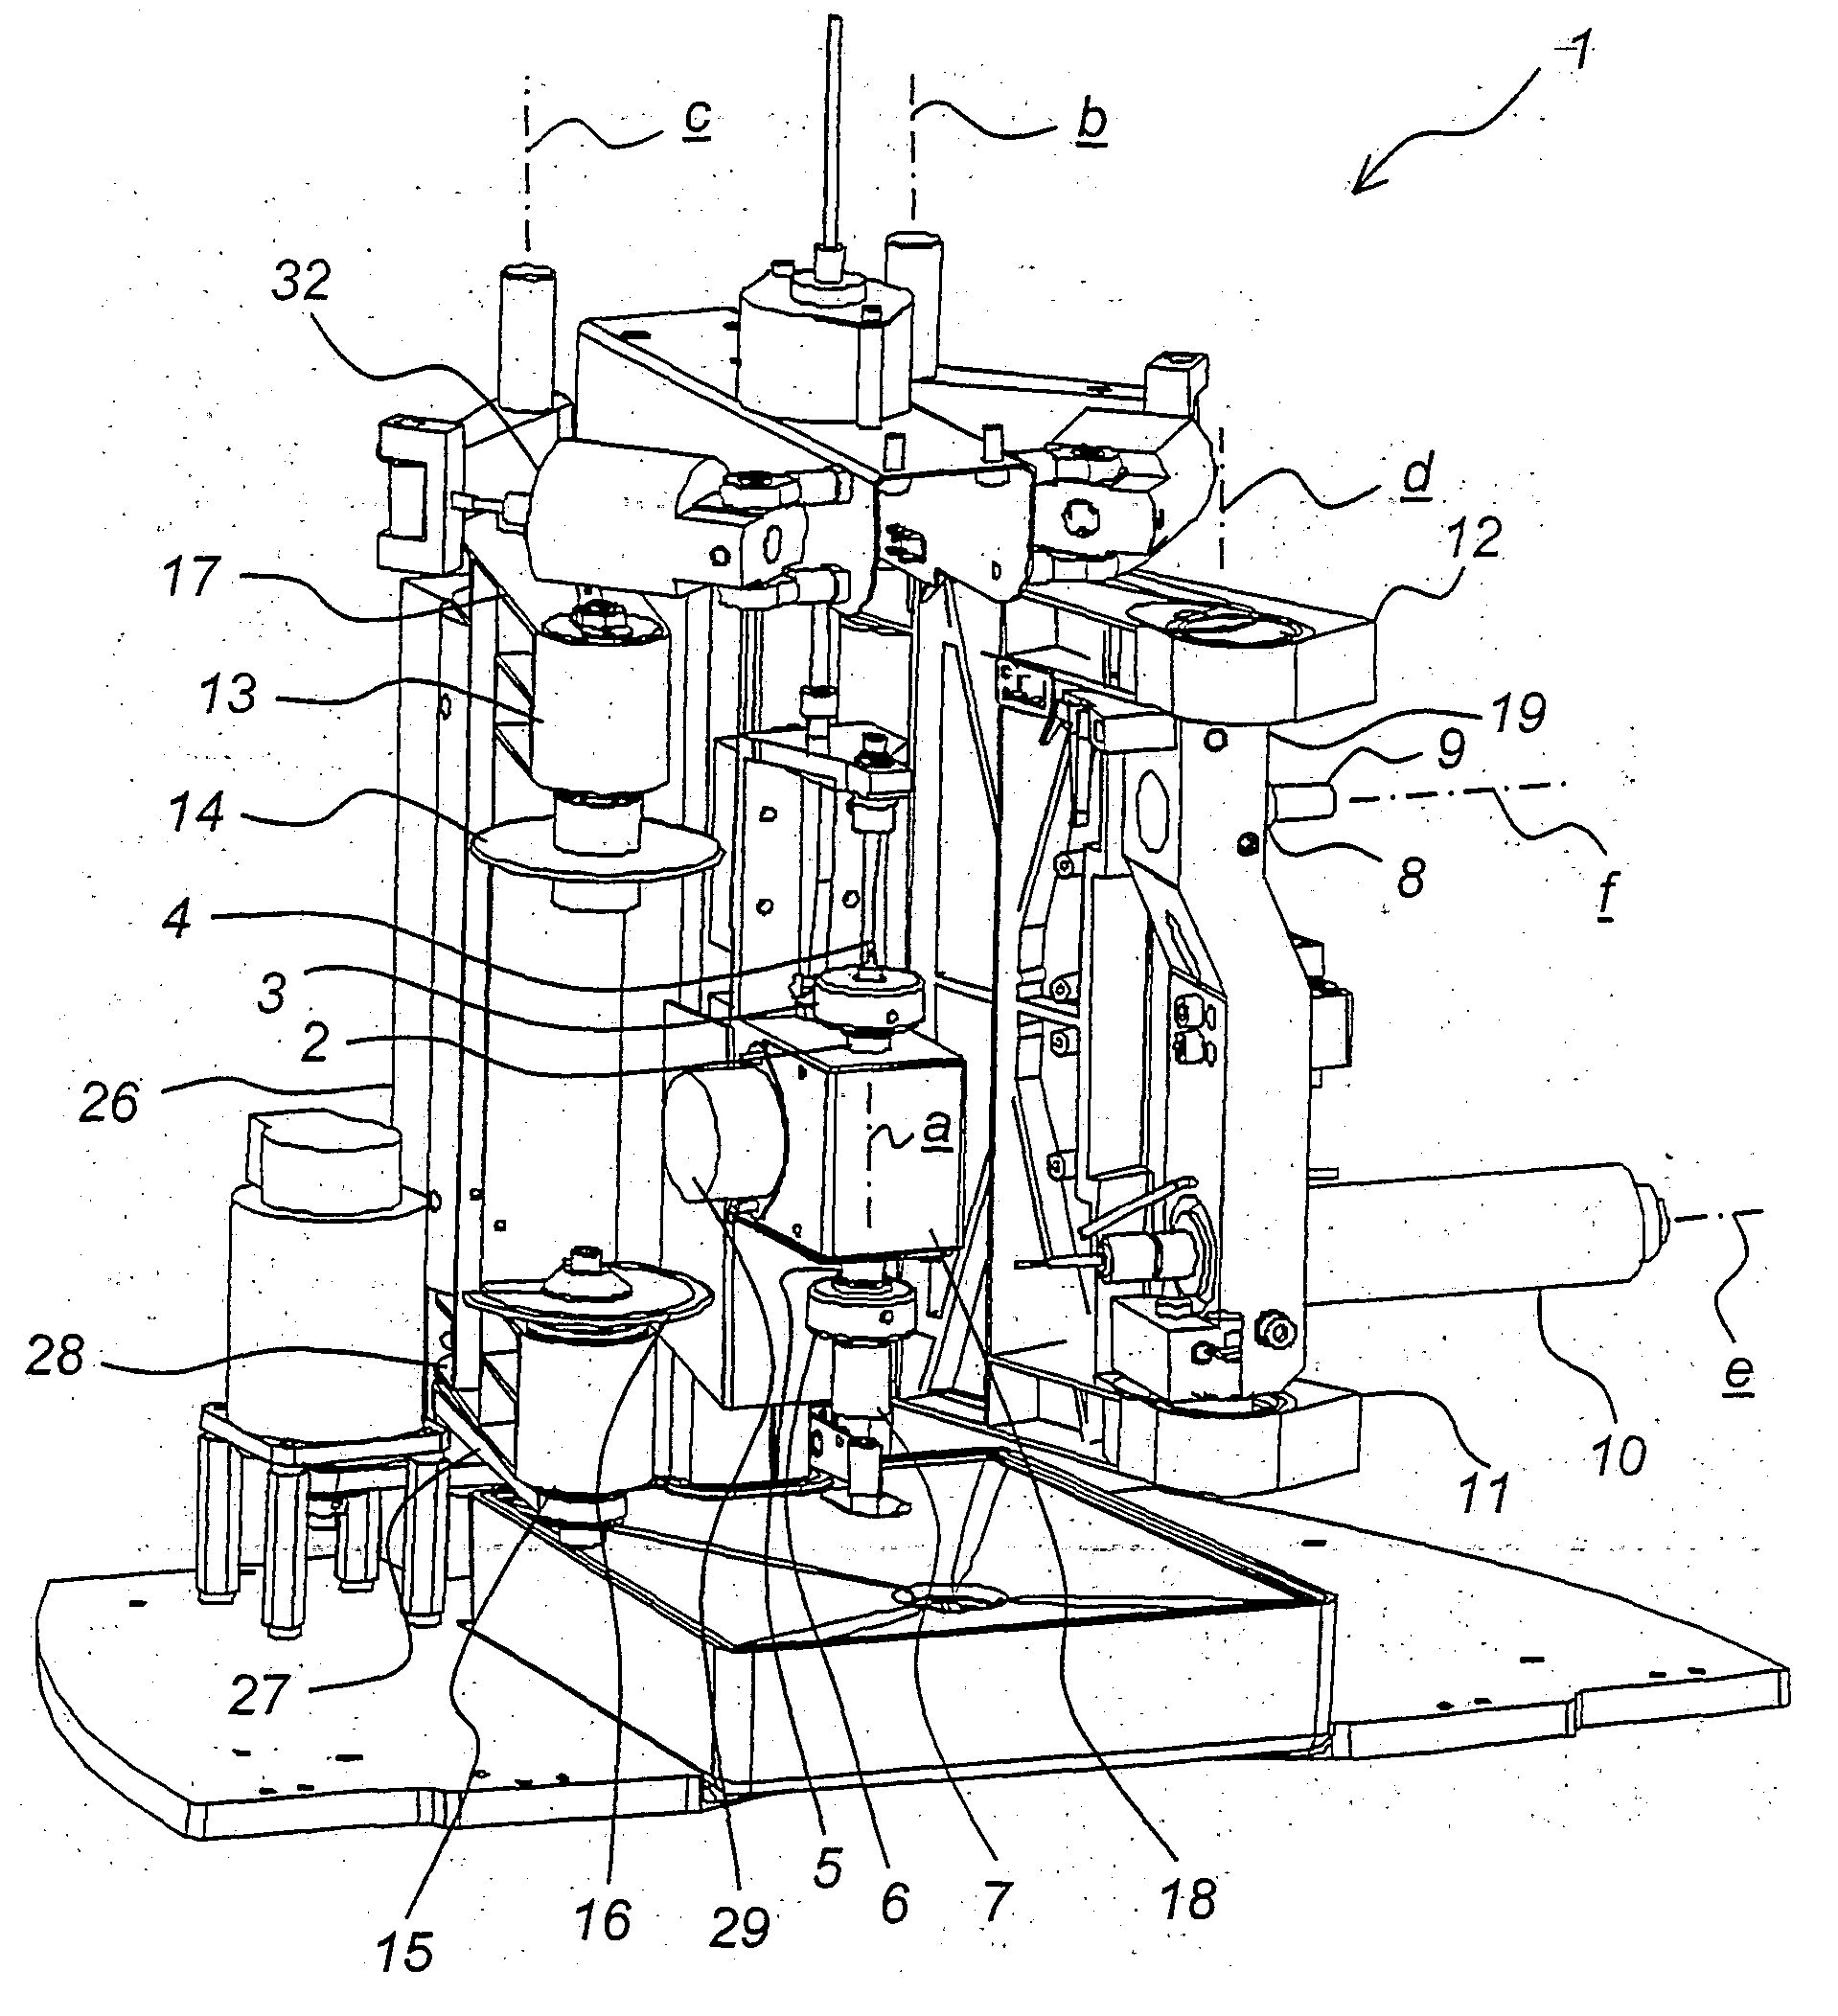 Apparatus for making dental inlays and the like